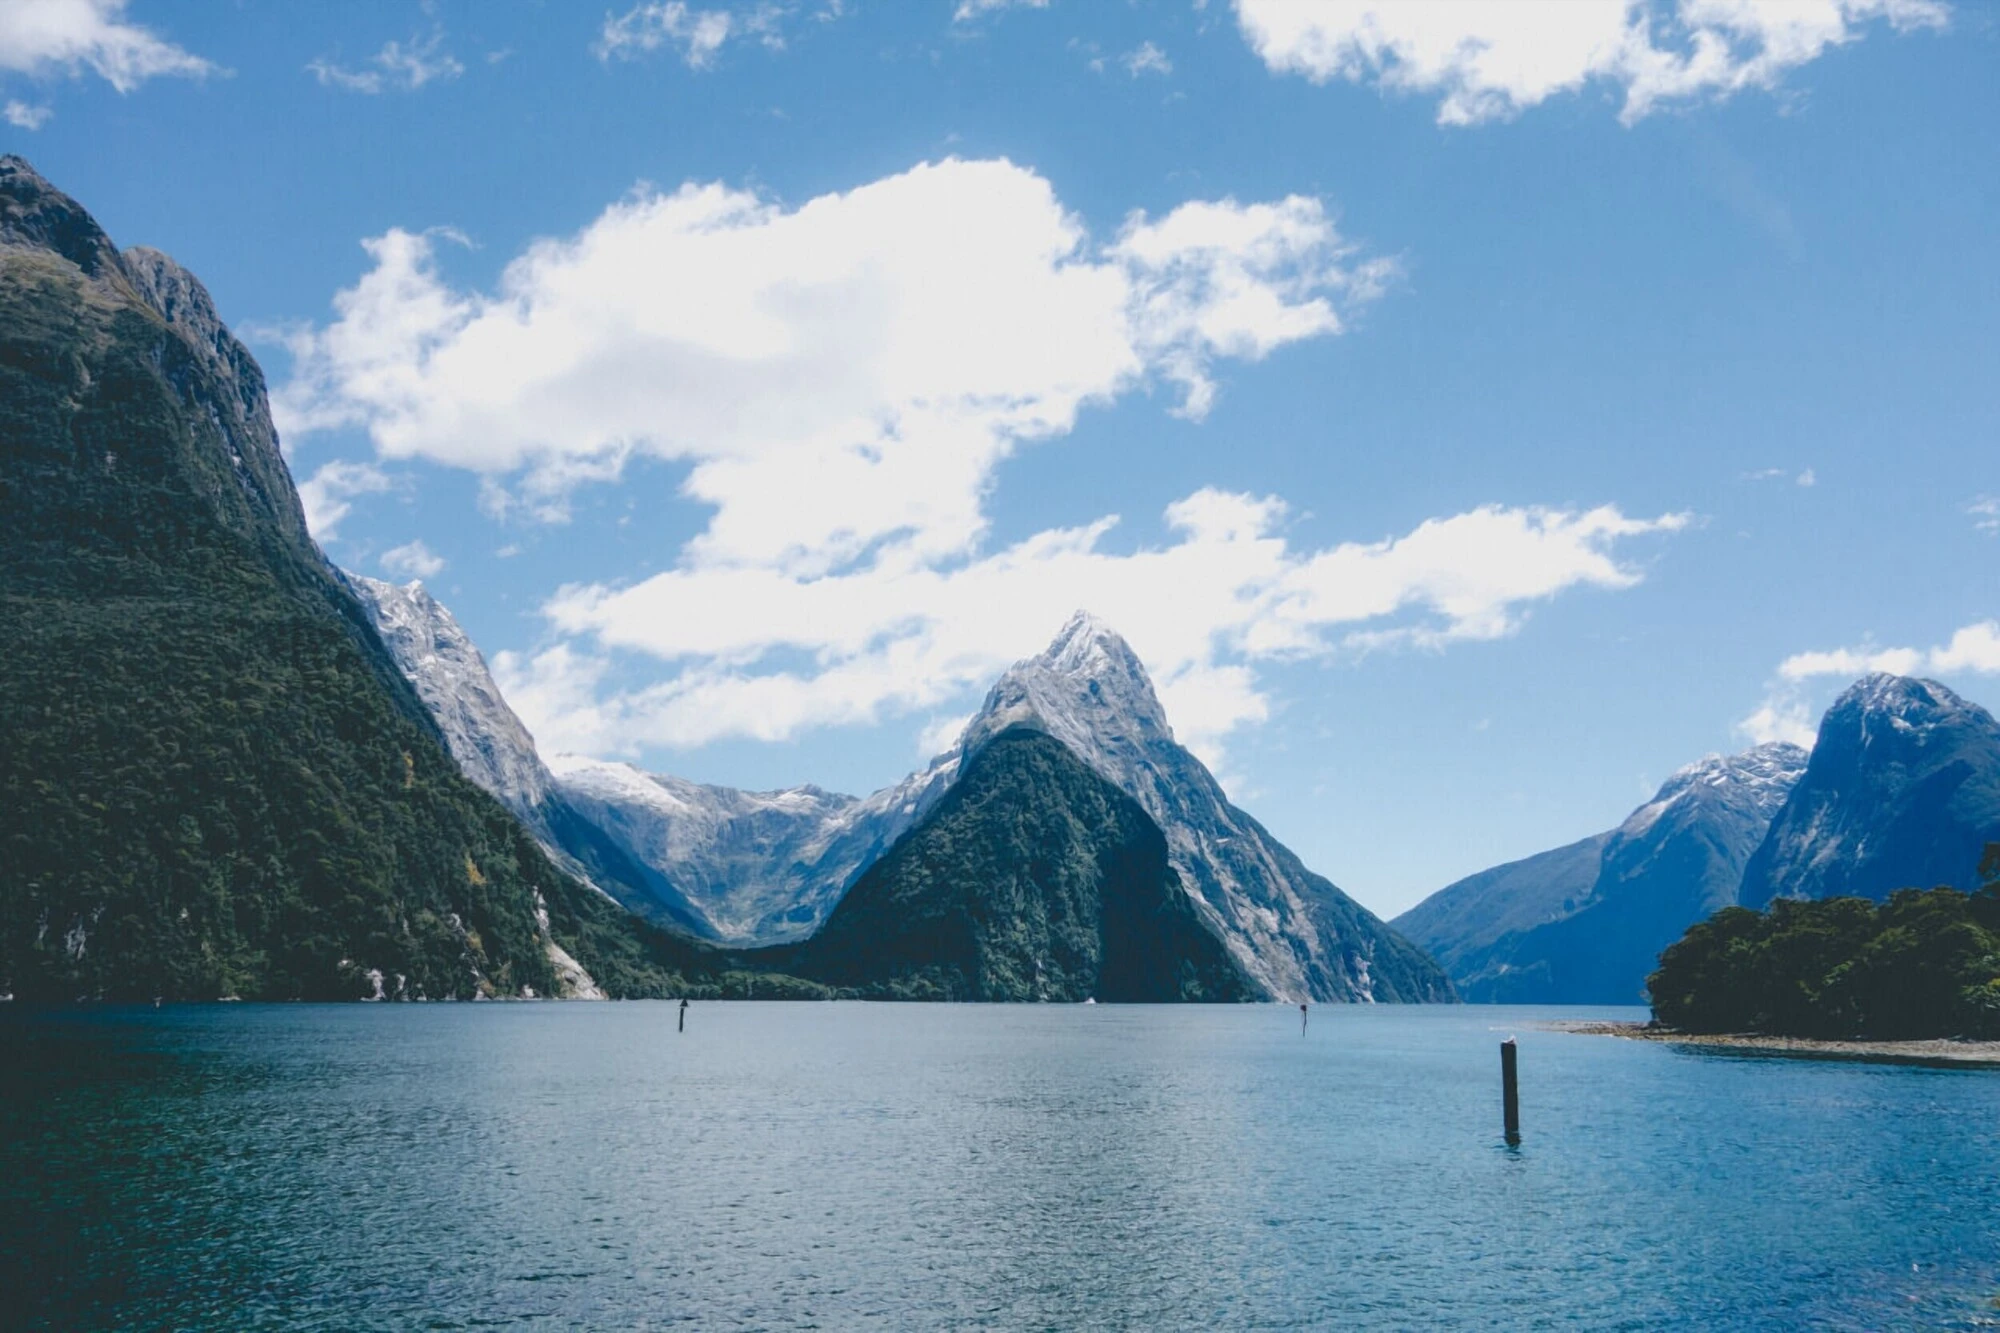 A Day Trip from Te Anau to the Milford Sound, New Zealand - The Ultimate Backpacking and Travel Guide to the Milford Sound